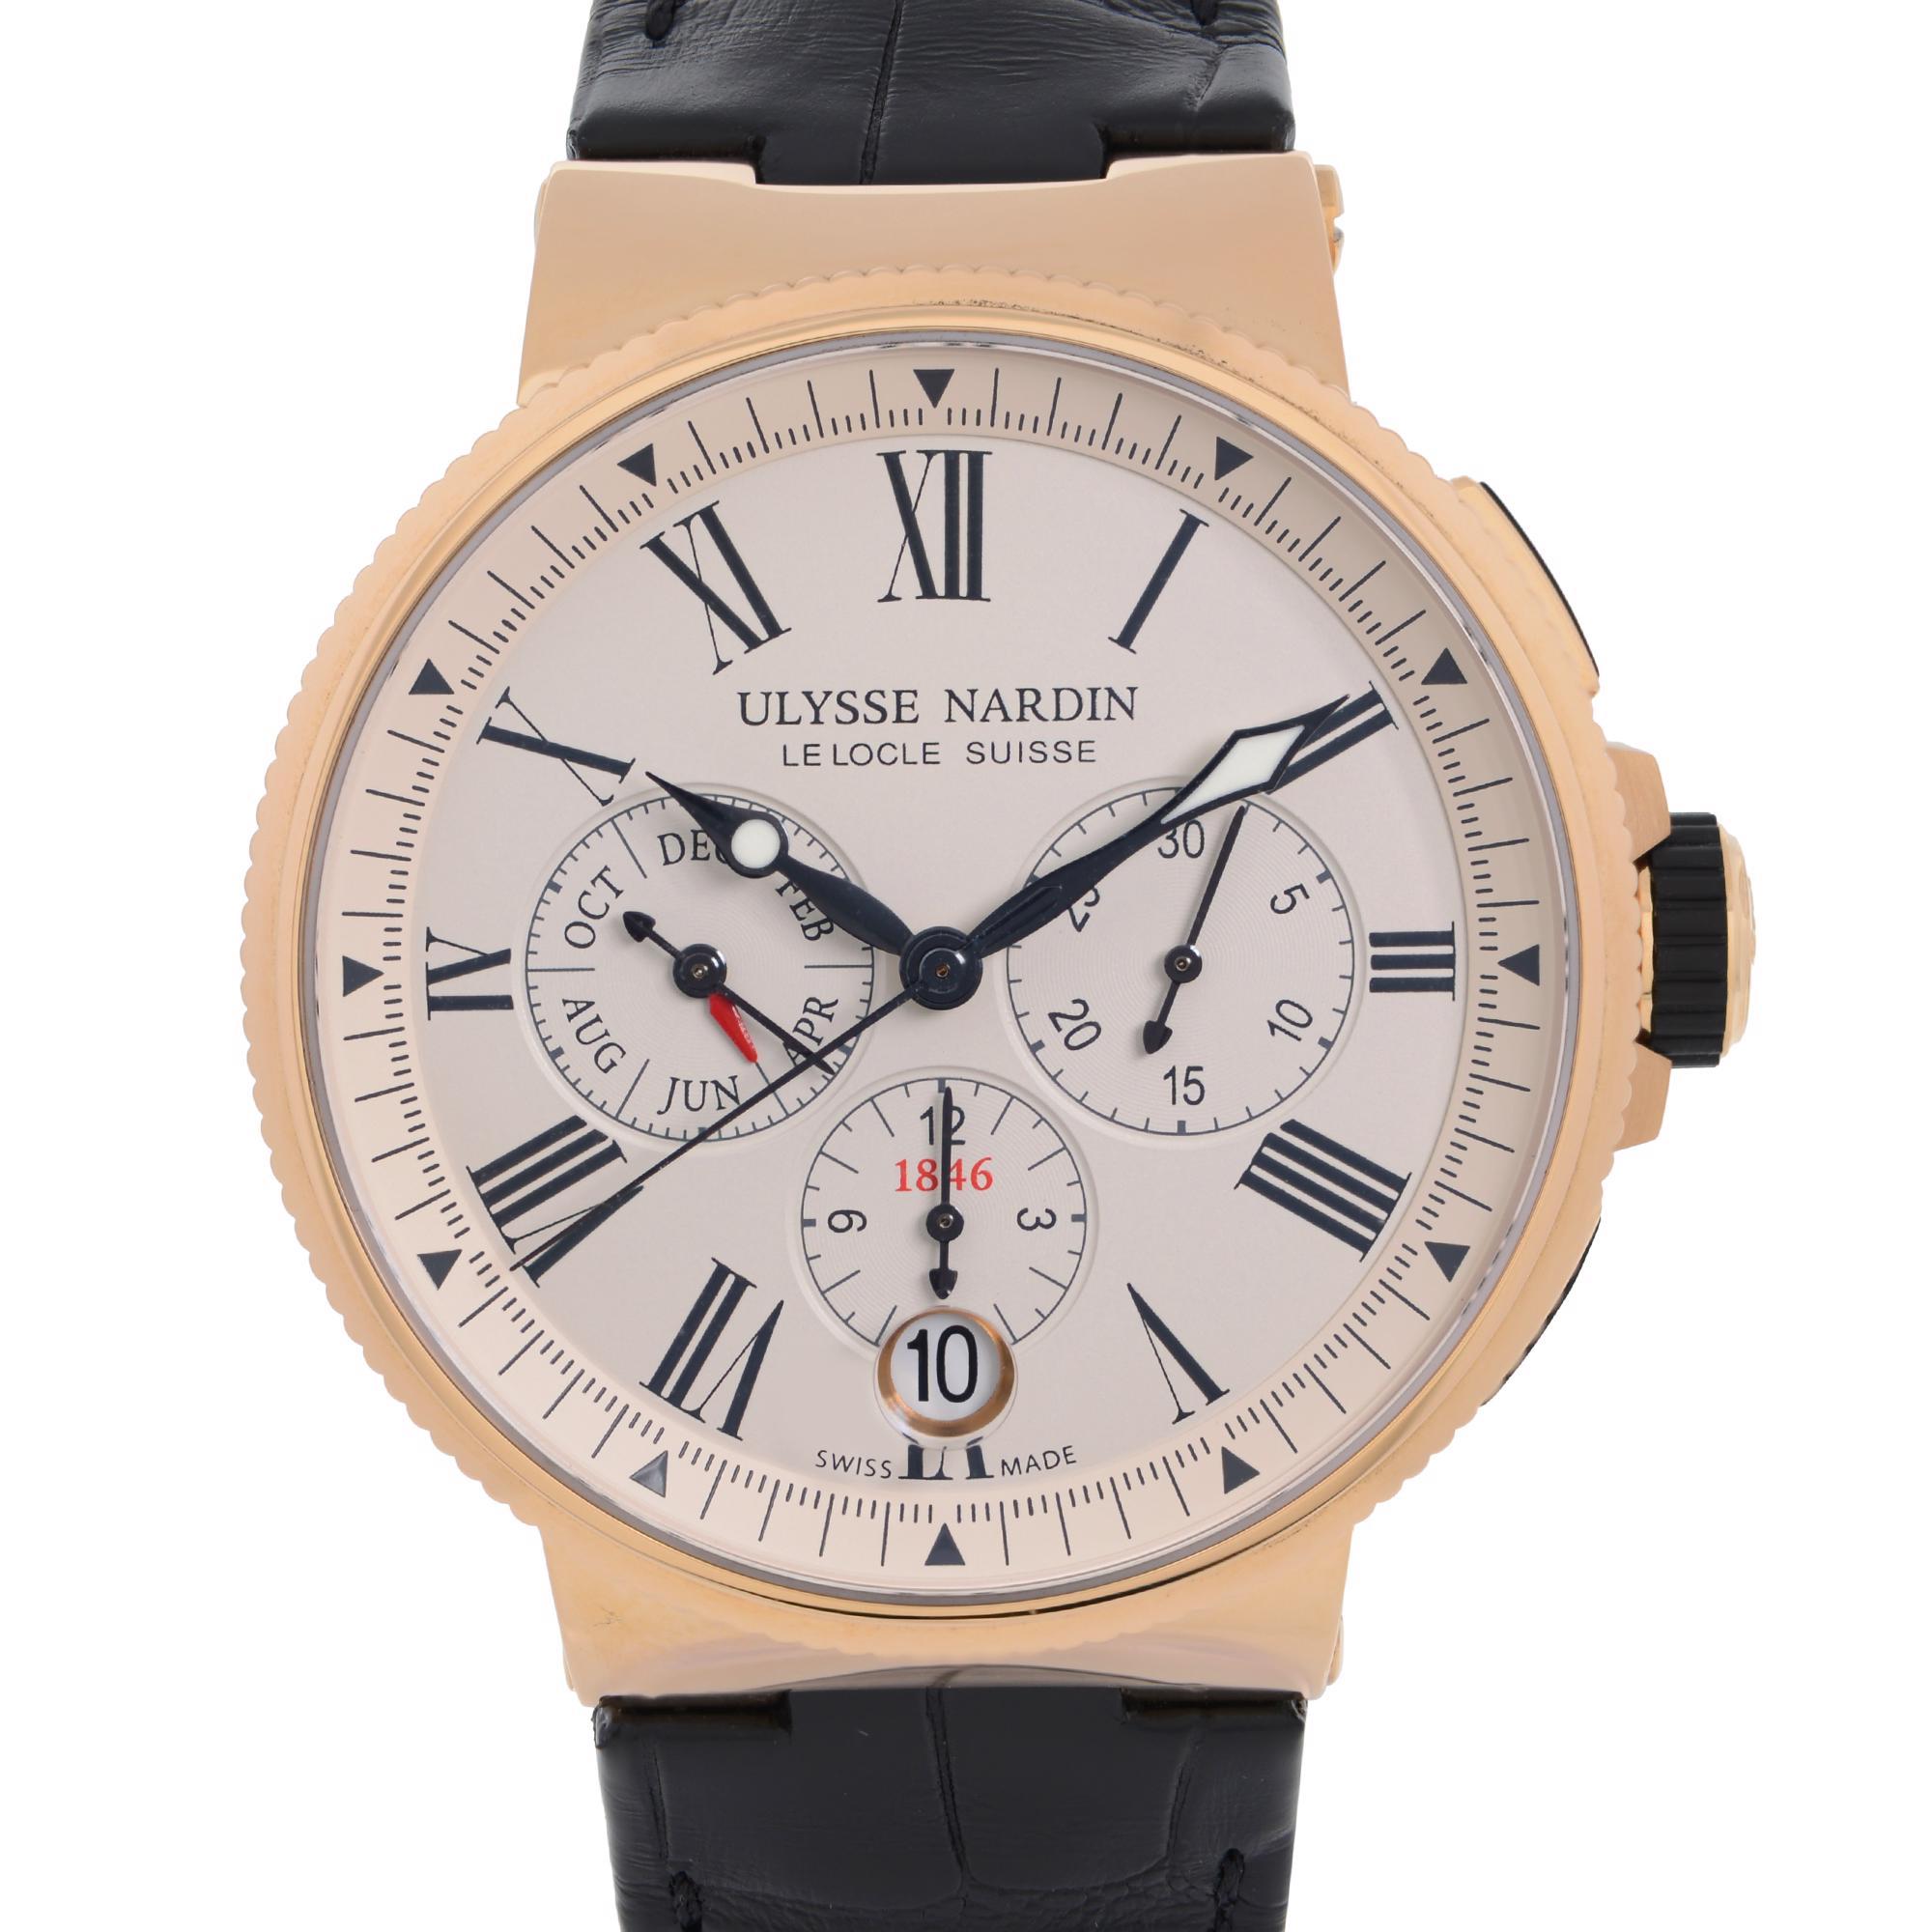 Unworn Ulysse Nardin Marine 43mm Chronograph18k Rose Gold Cream Dial Automatic Men's Watch 1532-150/40. This Beautiful Timepiece is Powered by an Automatic Movement and Features: 18k Rose Gold Case with a Black Leather Strap, Fixed 18k Rose Gold